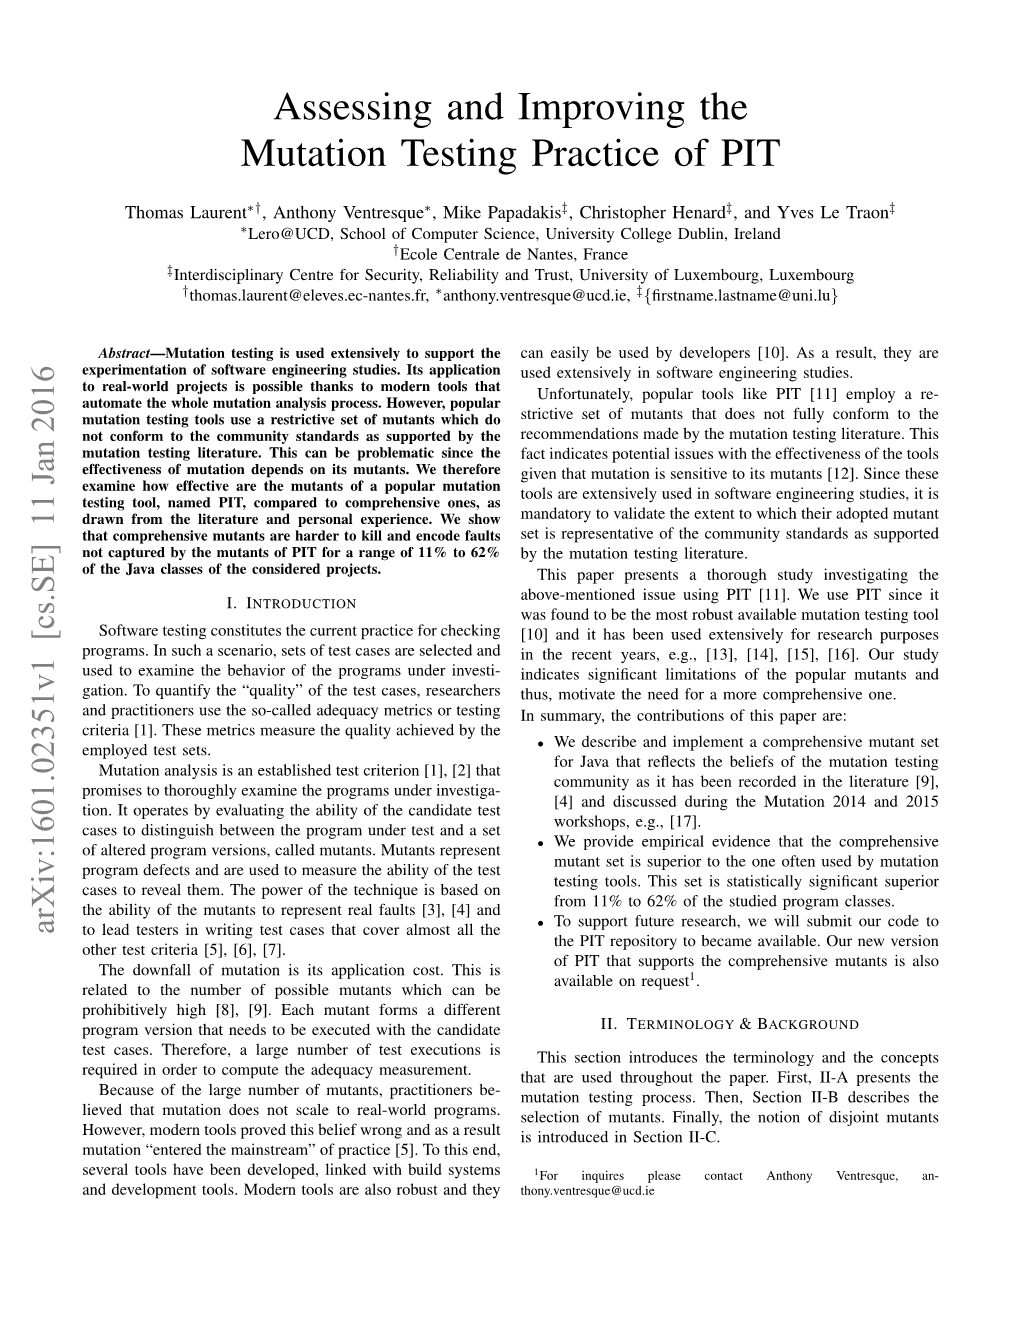 Assessing and Improving the Mutation Testing Practice of PIT